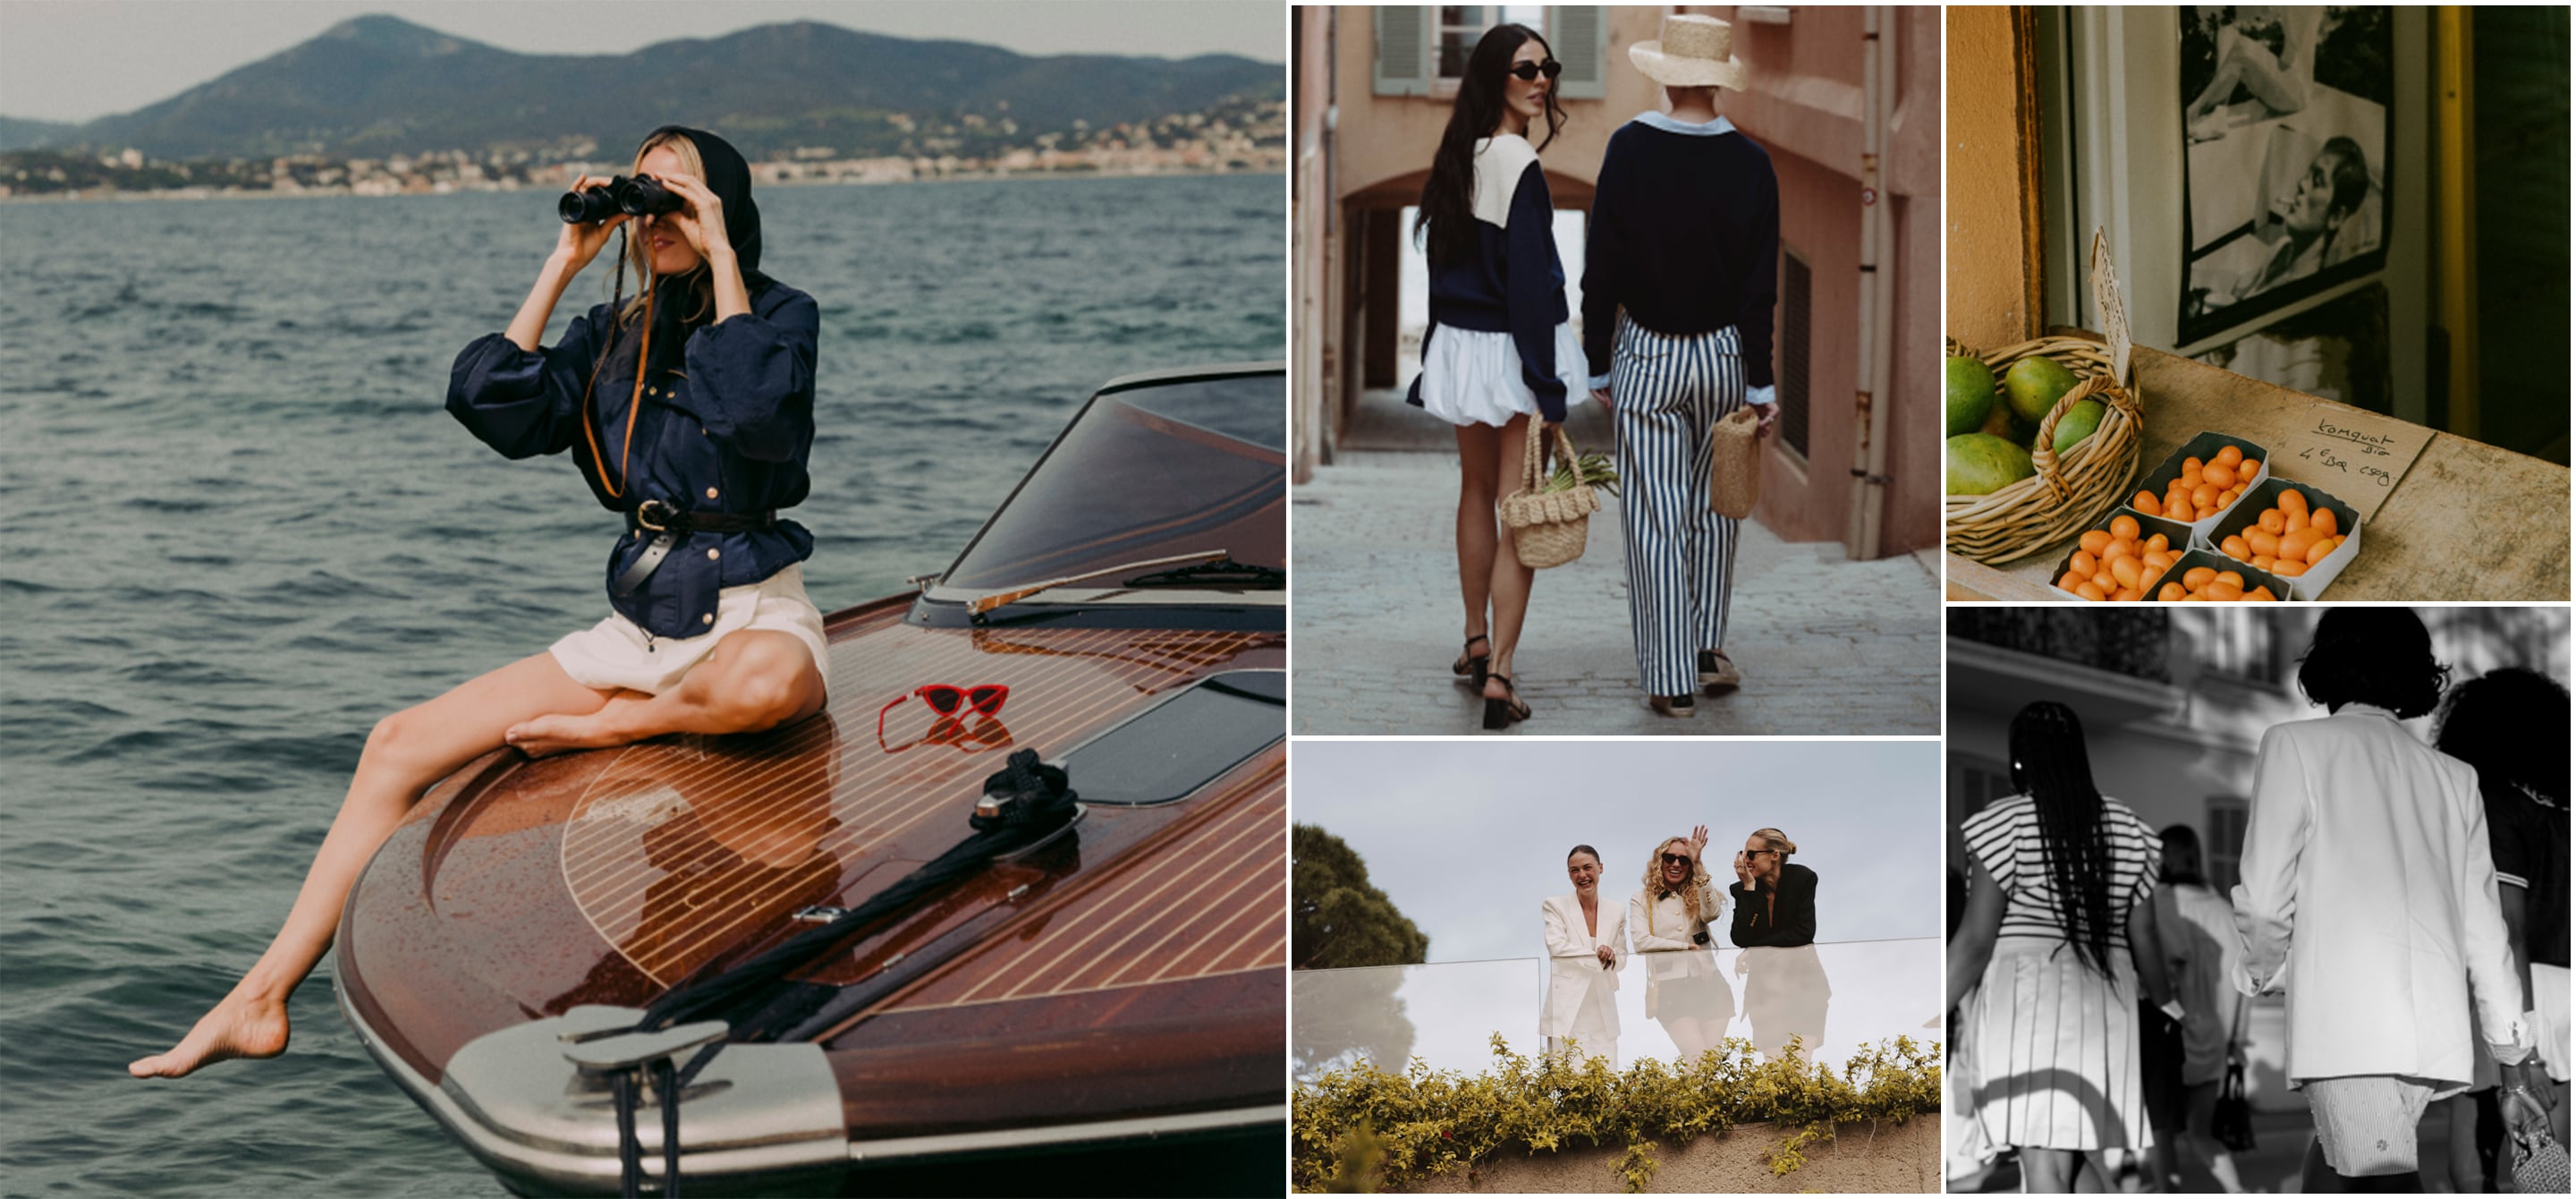 A French Persuaion: J.Crew in St. Tropez